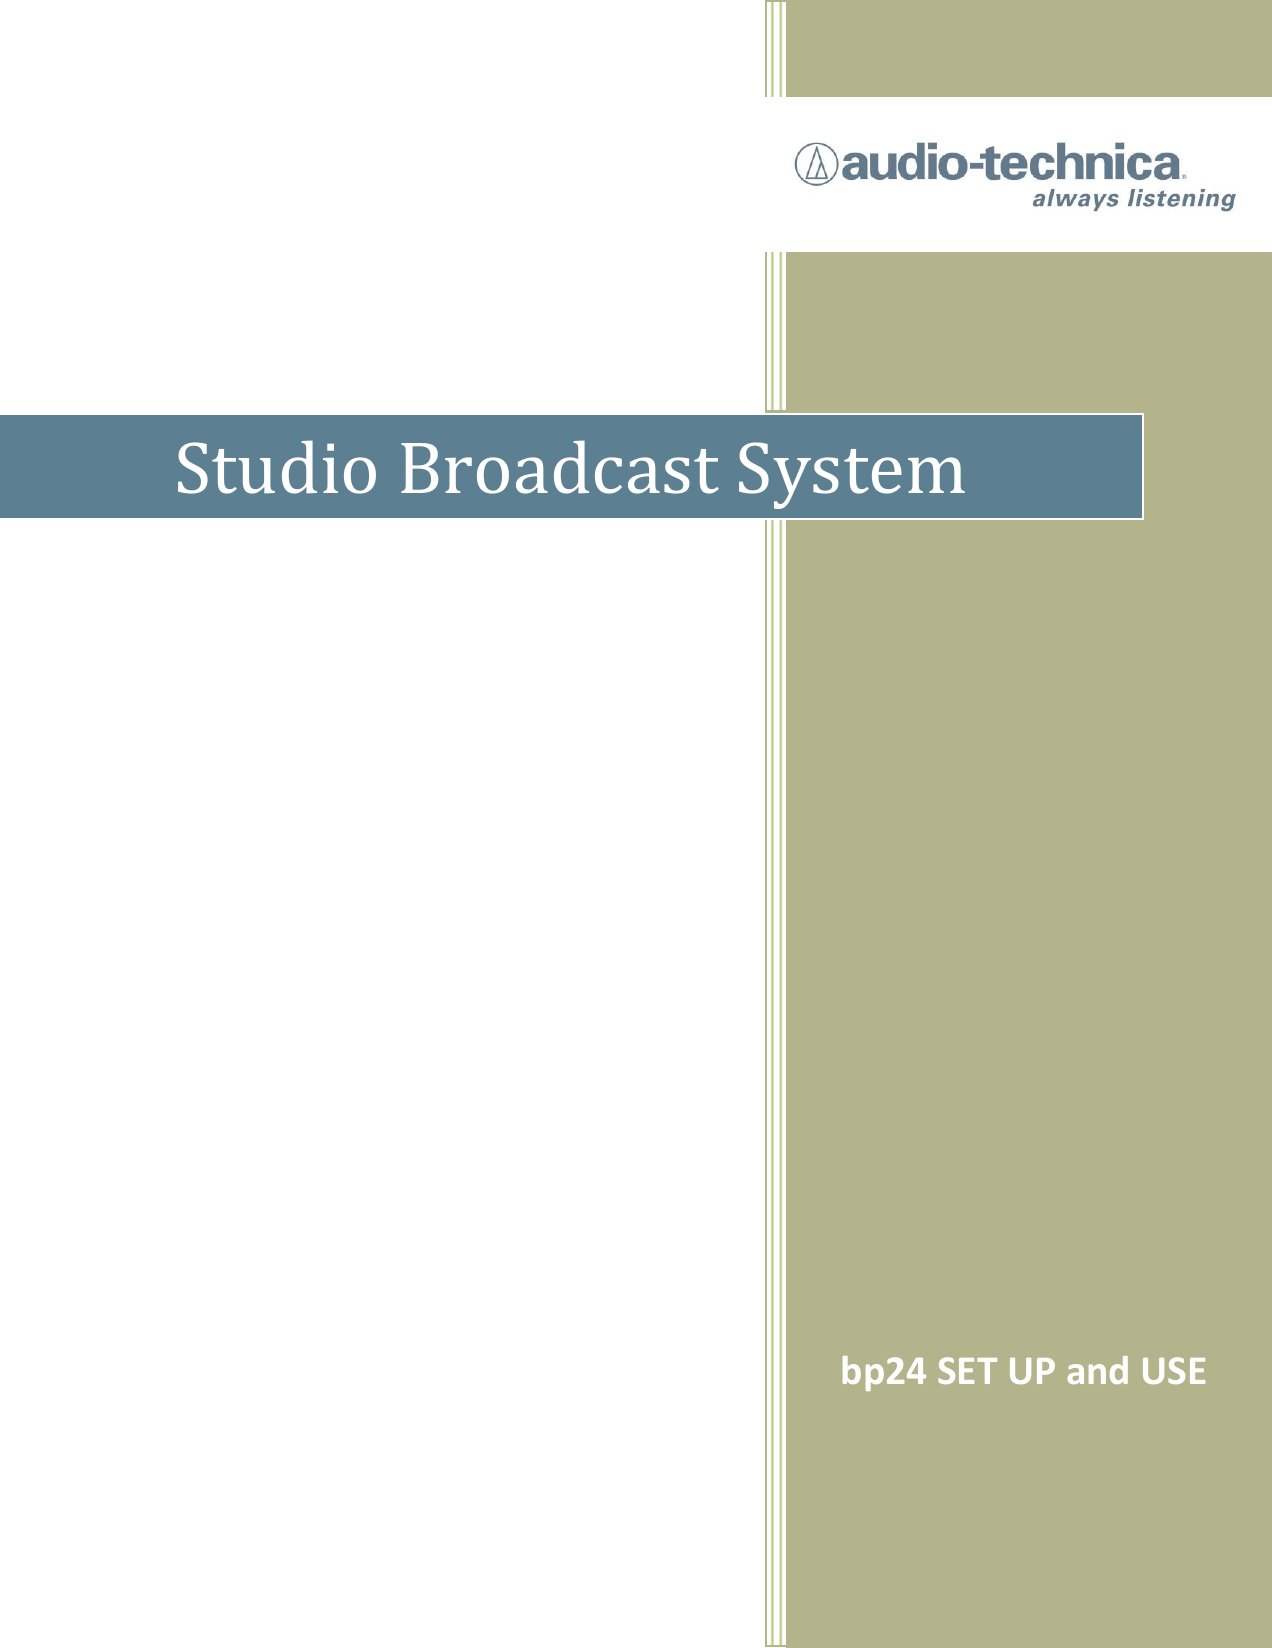      Studio Broadcast System bp24 SET UP and USE  